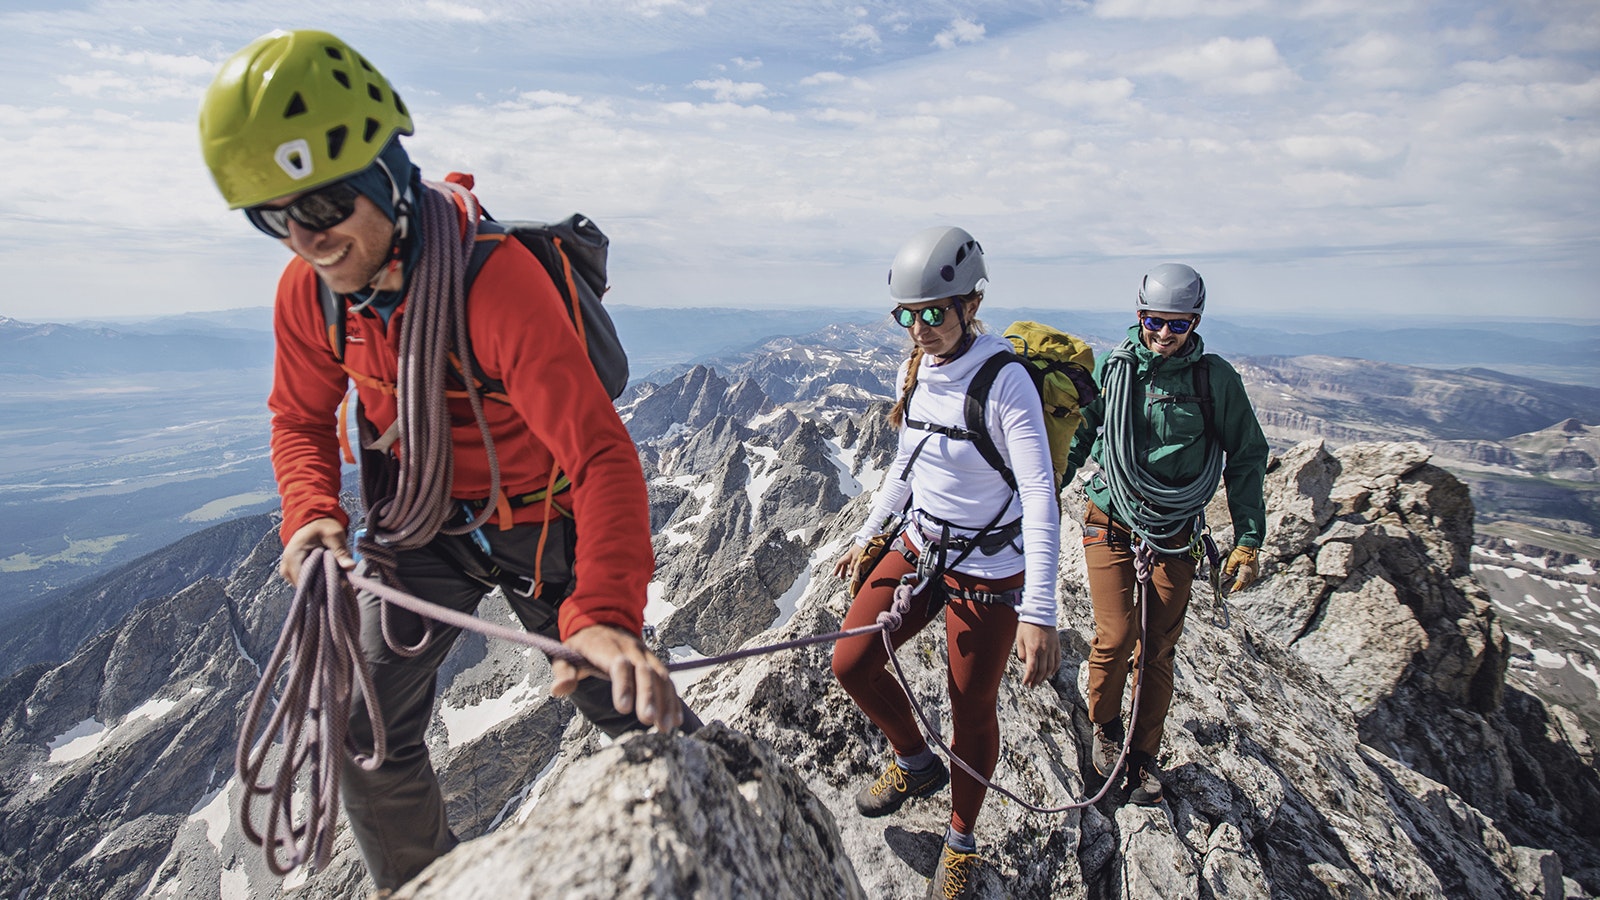 A group of hikers and climbers summit a peak in the Grand Tetons of Wyoming.